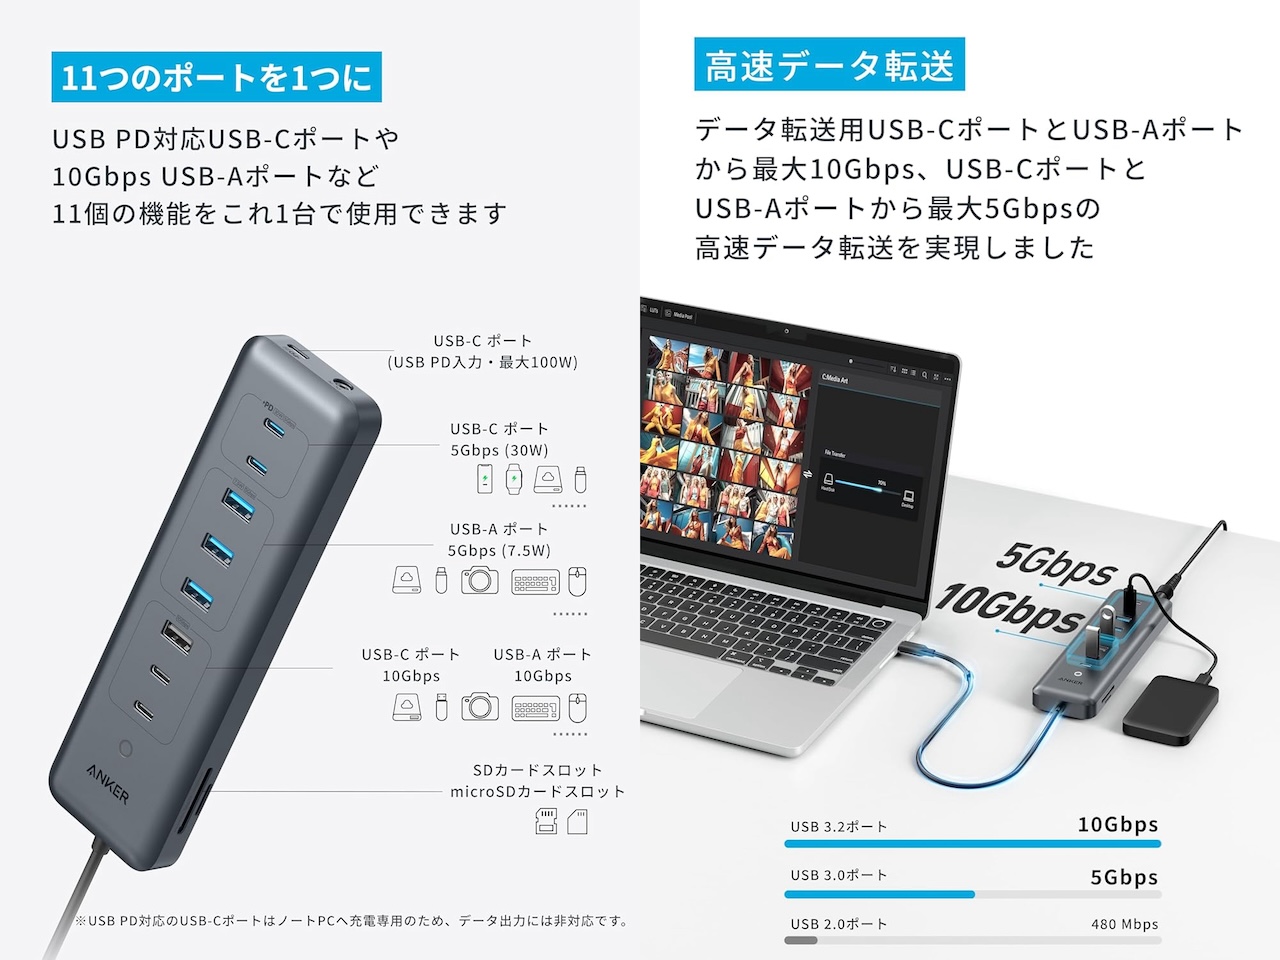 Anker USB-C データ ハブ (11-in-1, 10Gbps)